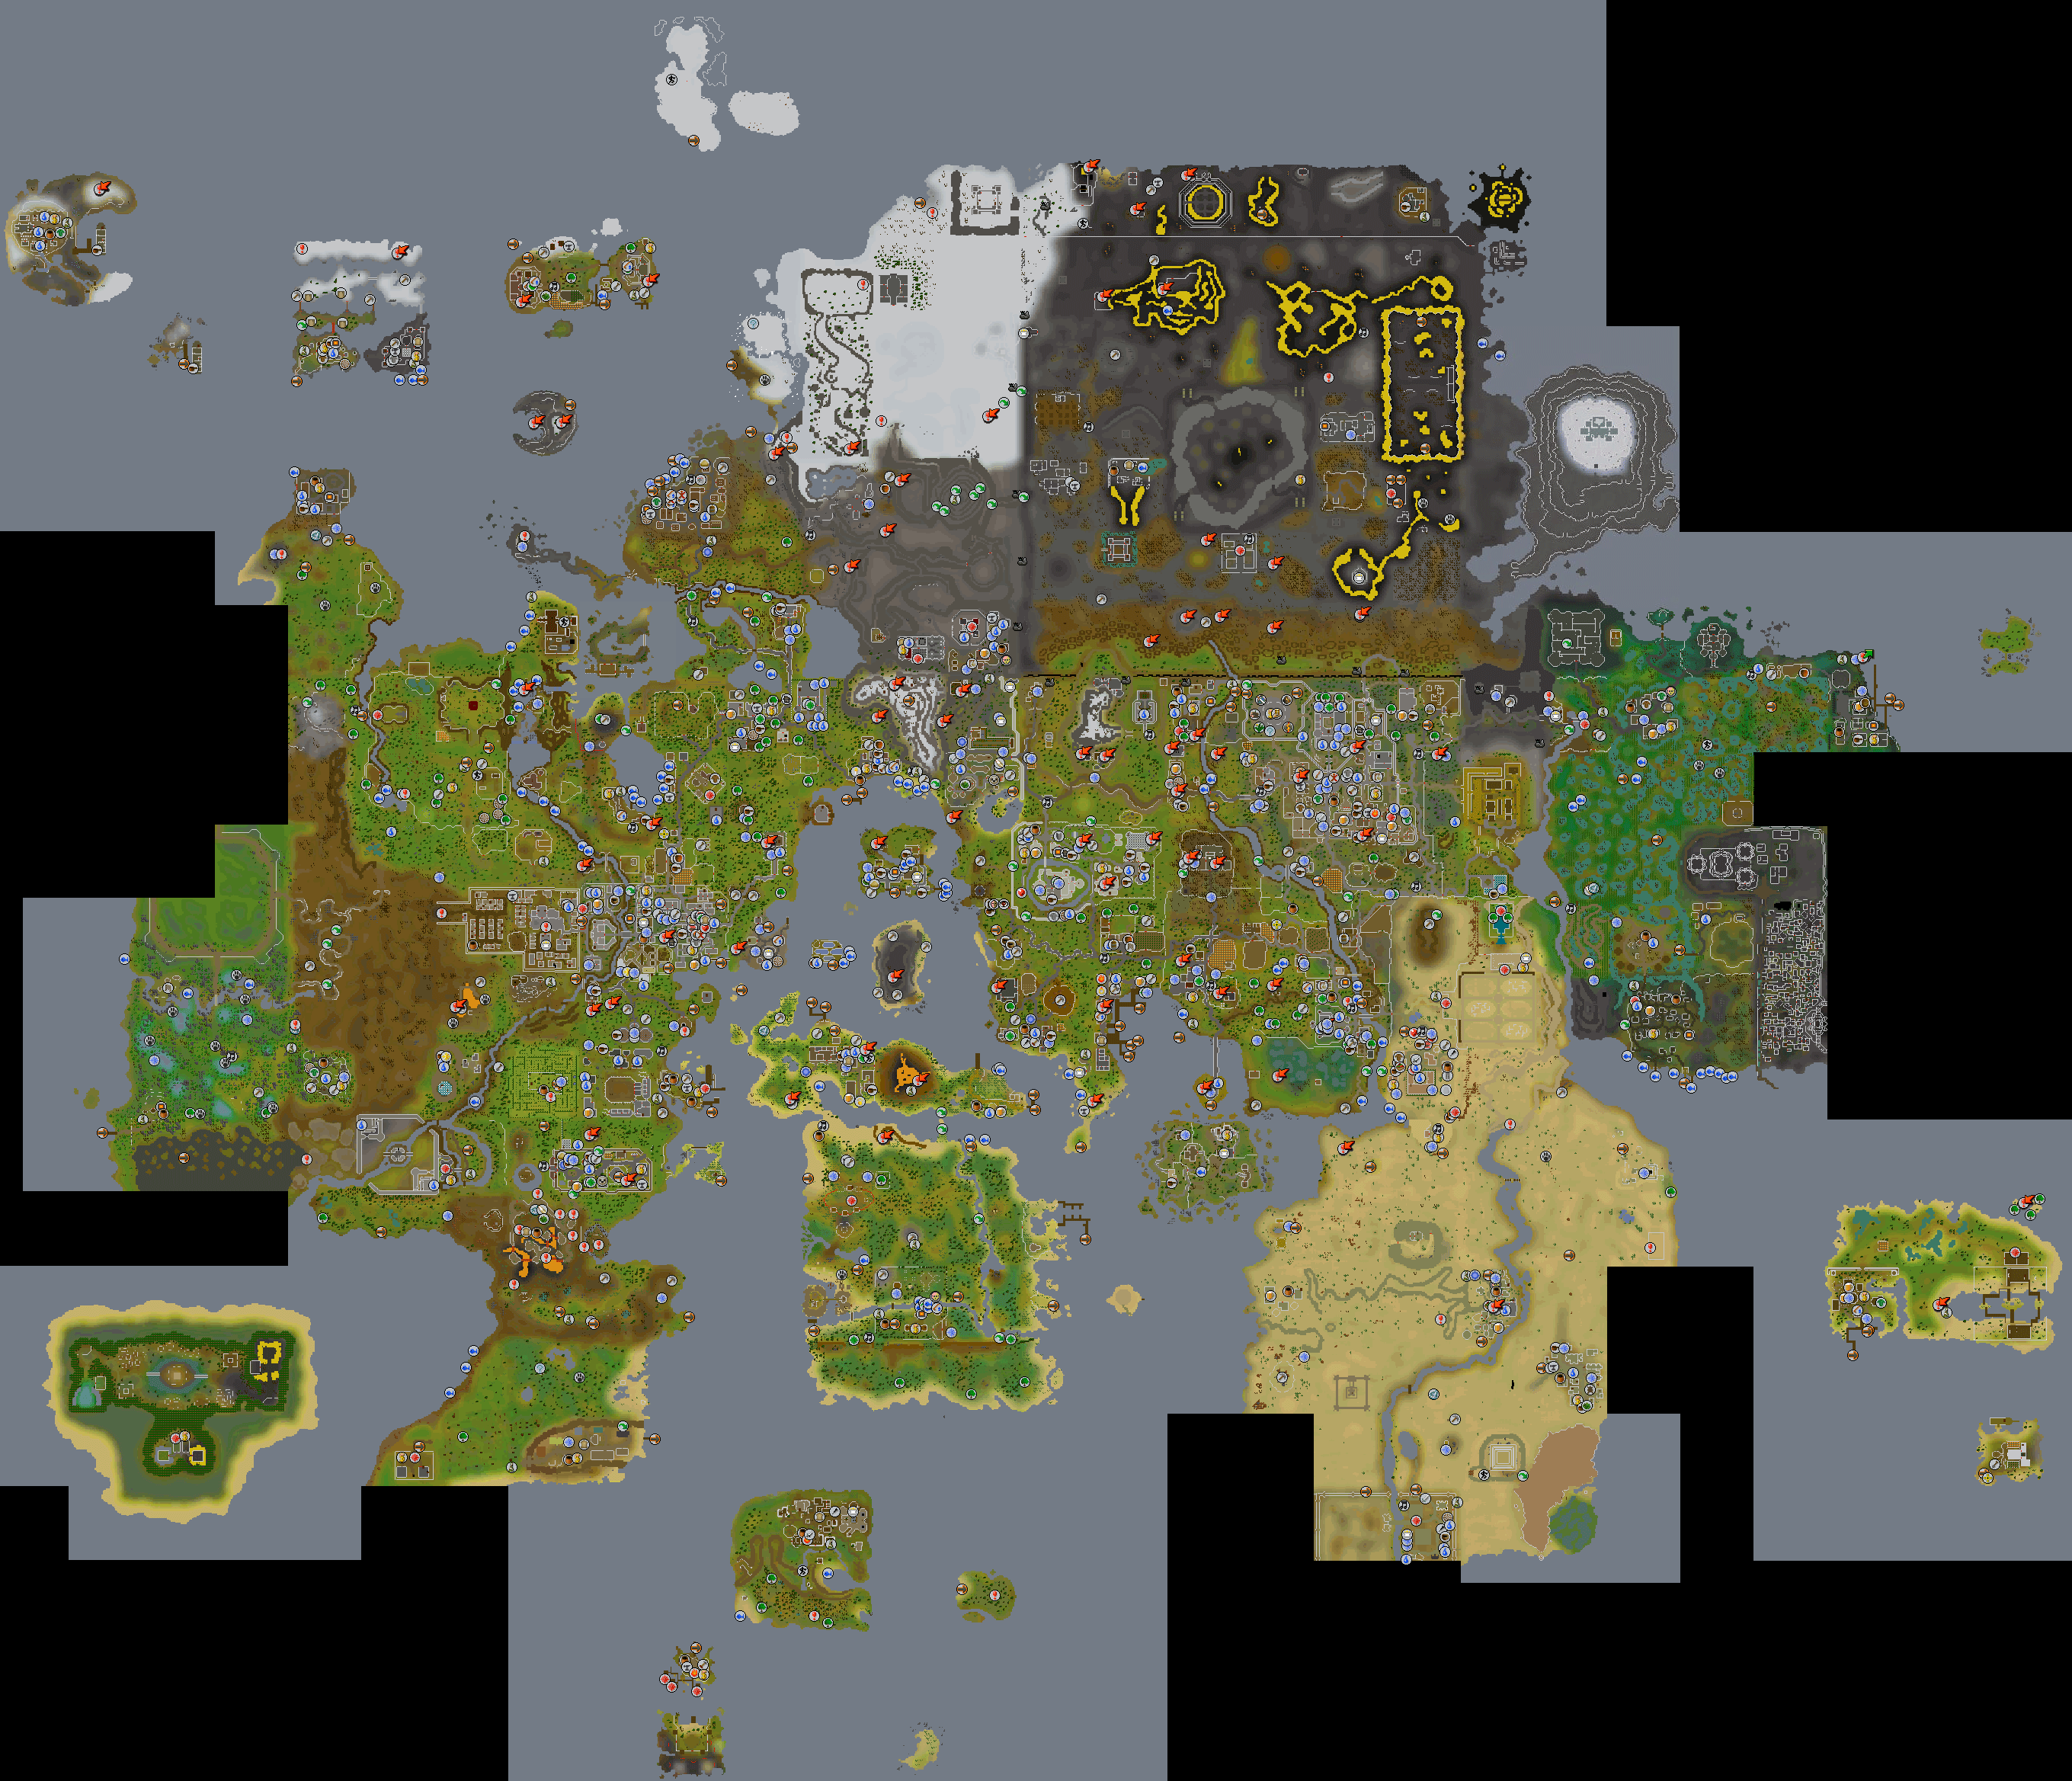 The RuneScape World map. Click on a location to view the wiki article.